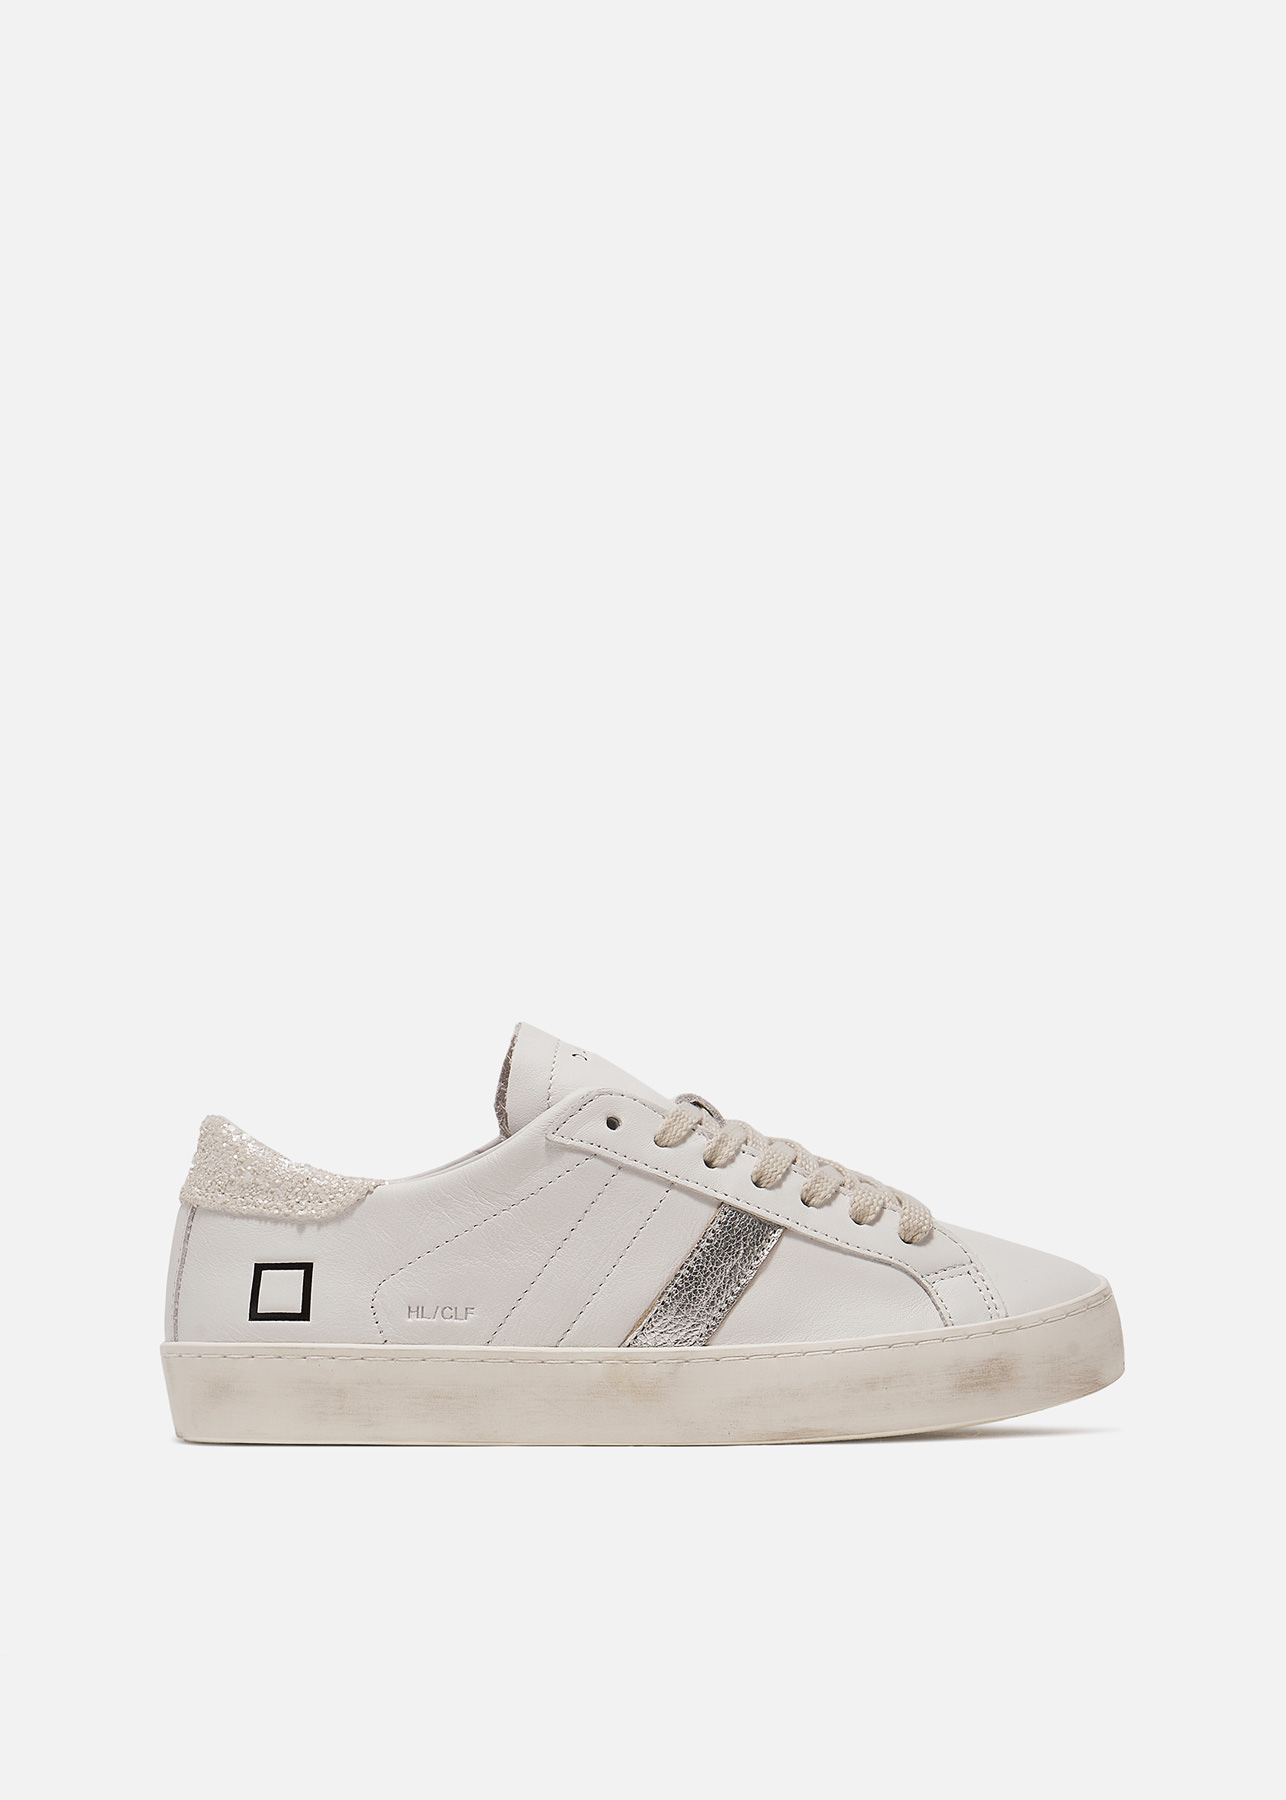 D.A.T.E. Sneakers HILL LOW CALF WHITE-IVORY | Date